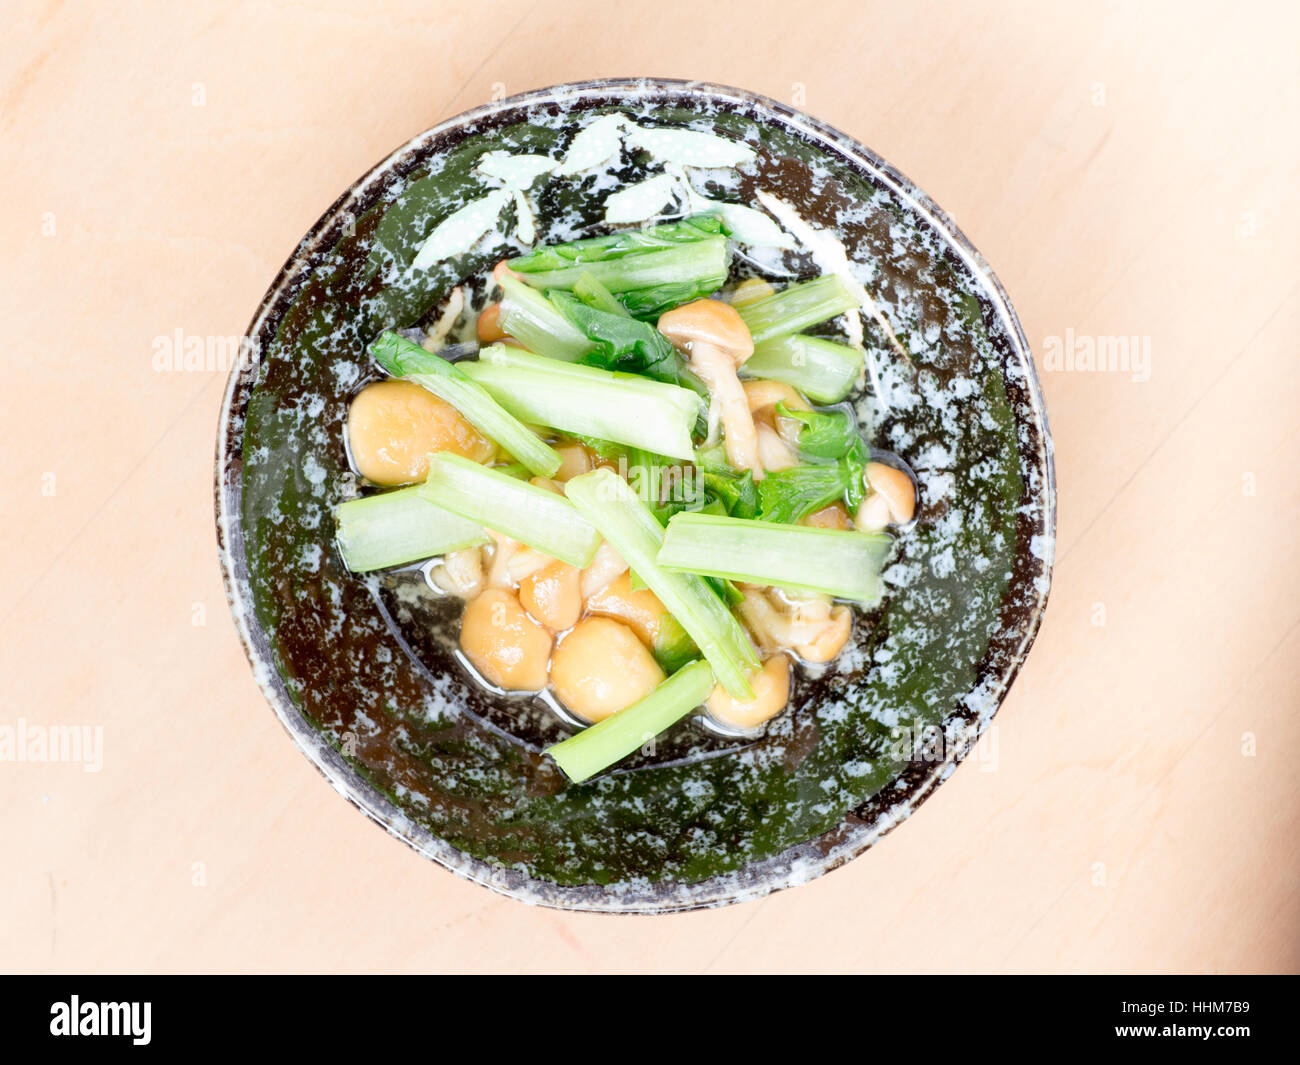 Japanese cuisine, slimy mushroom called nameko and spinach in the bowl Stock Photo